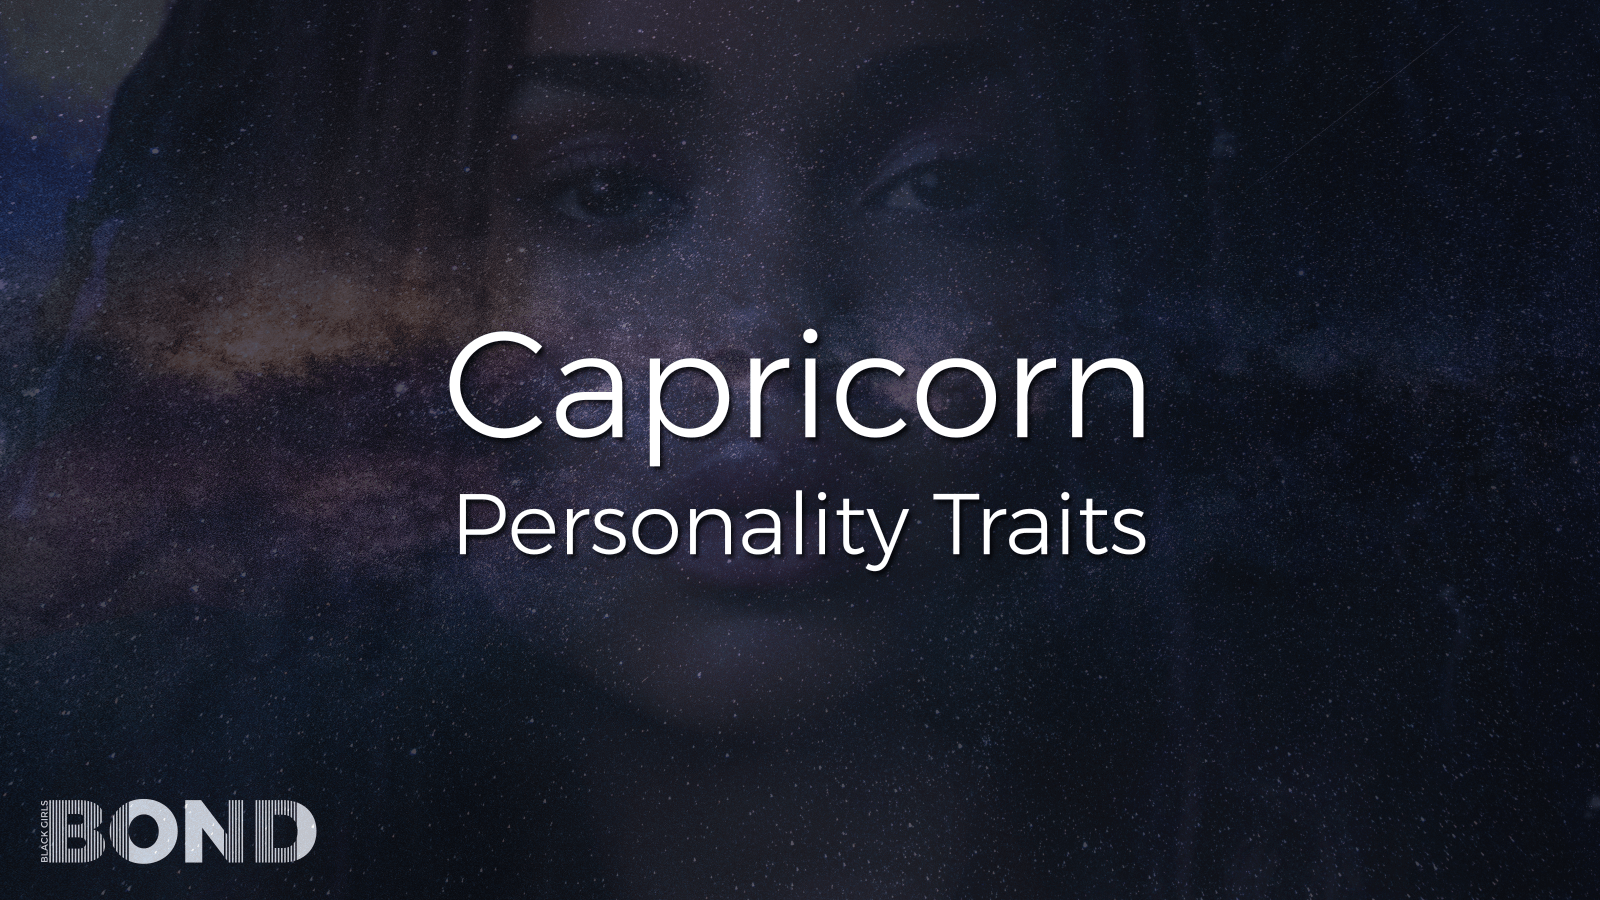 Capricorn Zodiac Sign: Personality Traits, Compatibility, Love, Relationships and More